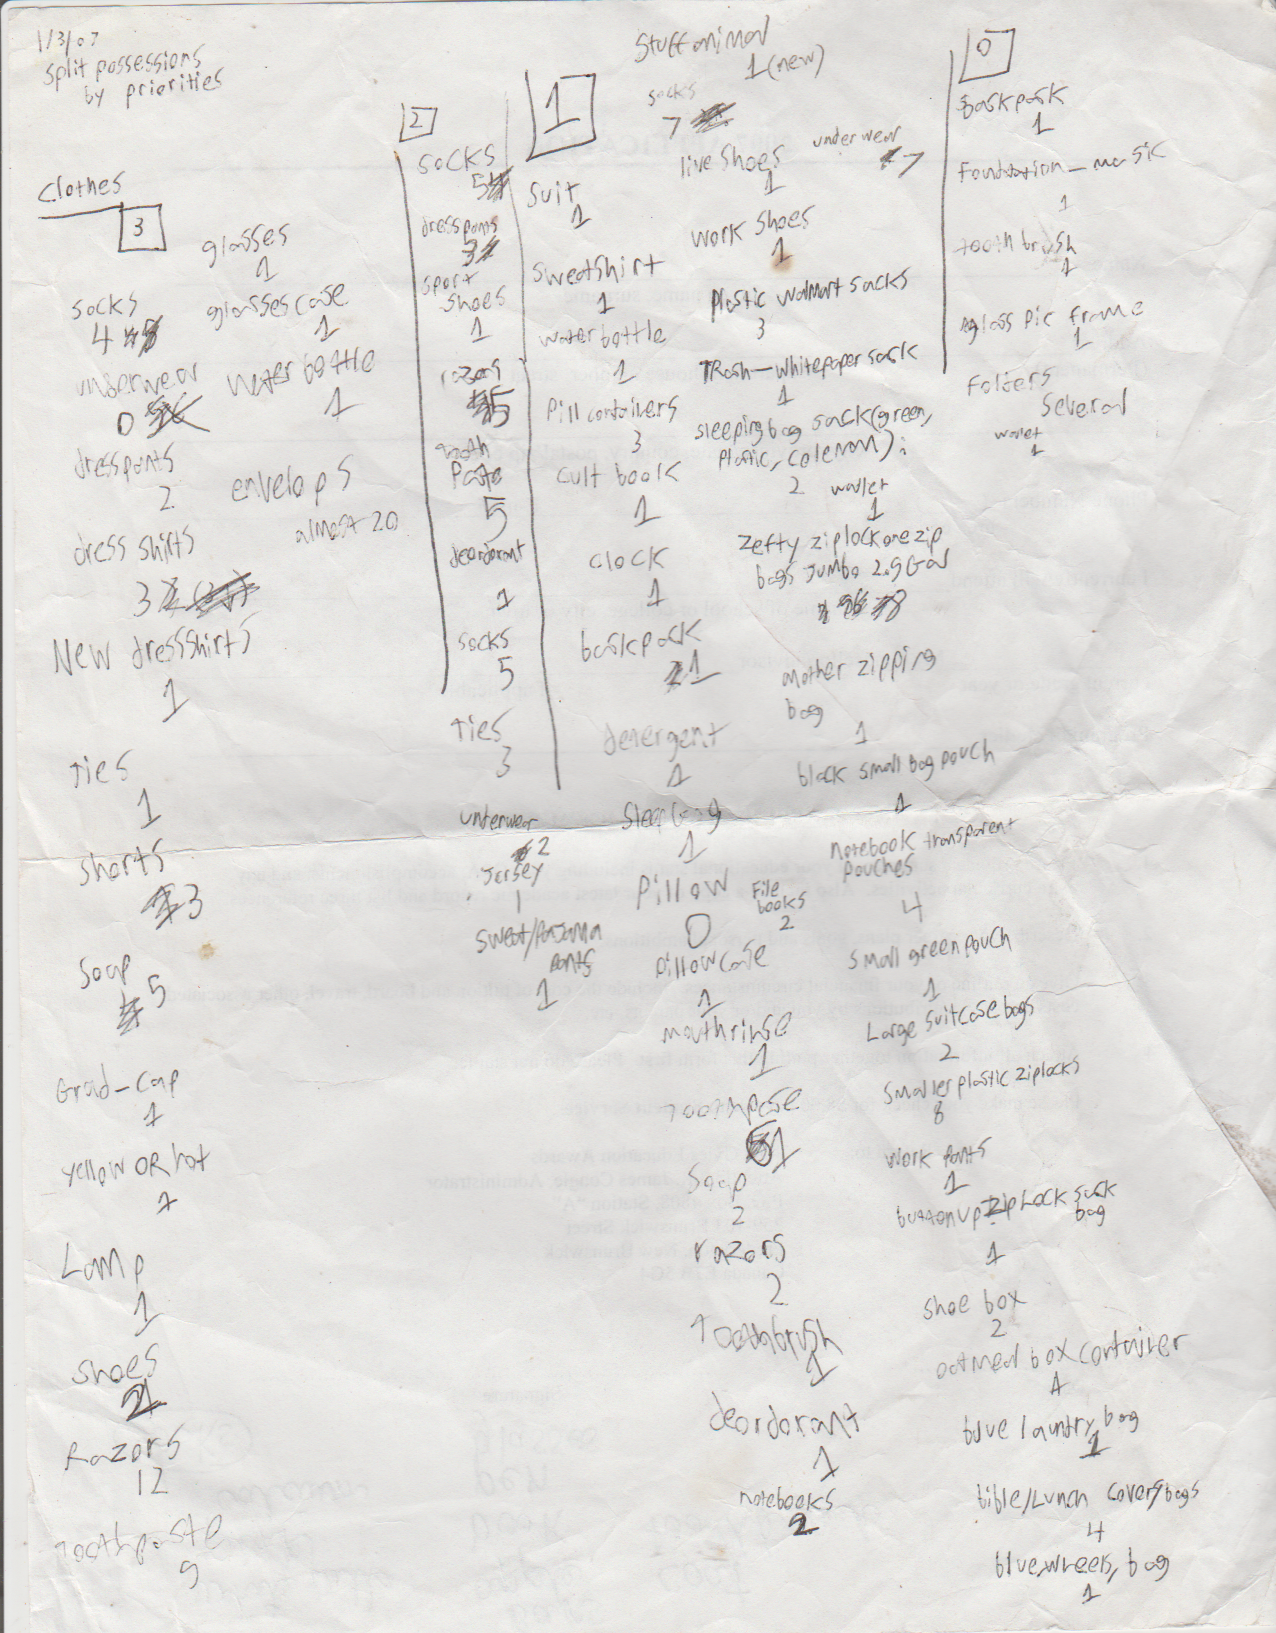 2007-01-03 - Wednesday - Possessions List - Joey Arnold - ABC College - List of what I owned then, clothes, pillows, soap, razors, etc-1.png